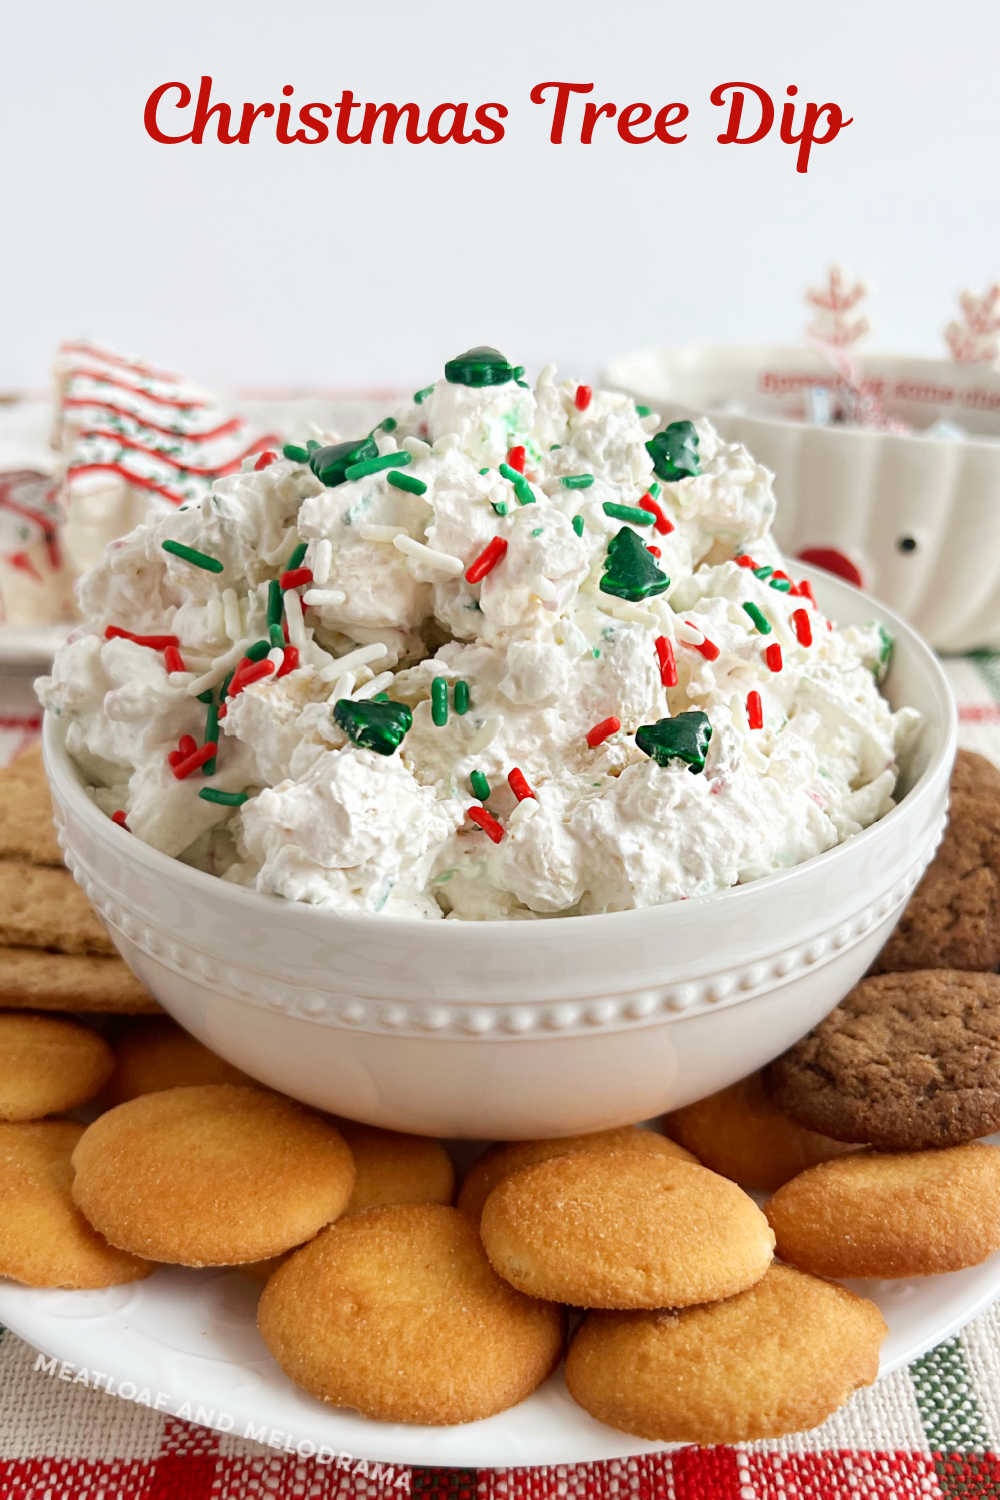 Little Debbie Christmas Tree Cake Dip is an easy recipe with seasonal snack cakes, cream cheese and Cool Whip. A festive no bake dessert recipe perfect for the holiday season! via @meamel